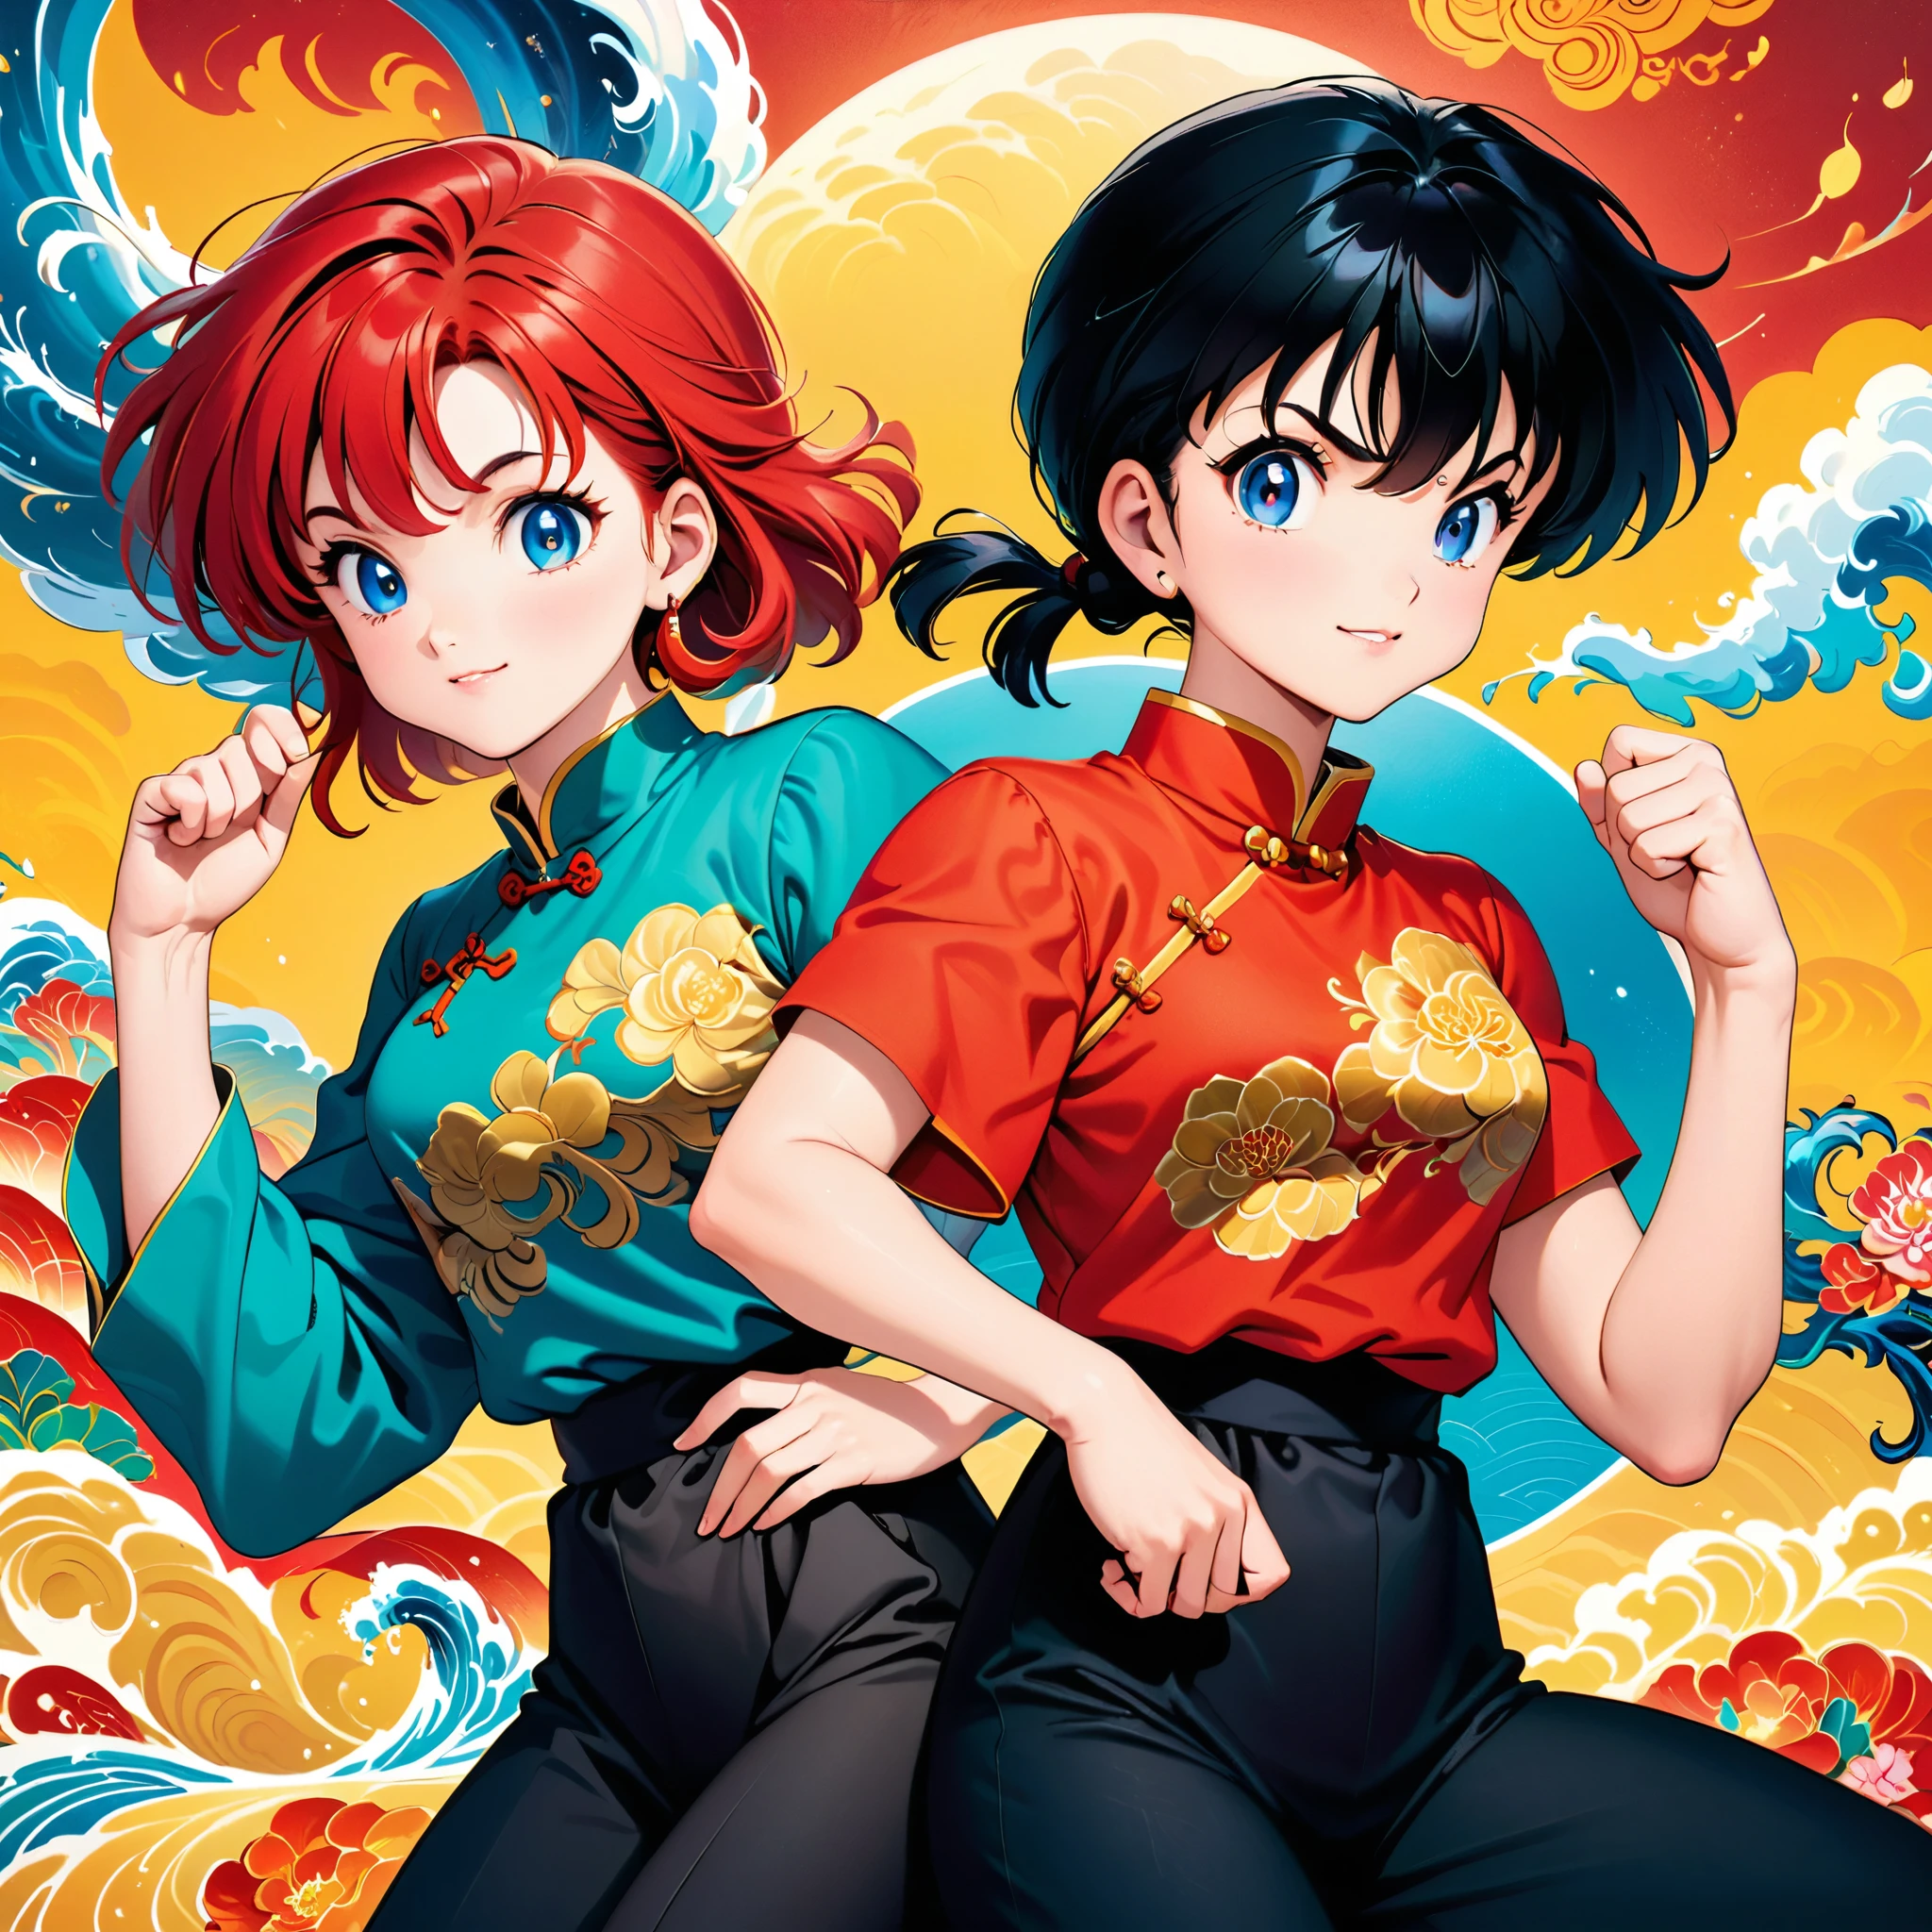 ((Two people in Chinese style: back to back)),woman,male,(ranma, ranmaw),(1 pigtail),ranma 1/2,battle pose,dynamic pose,(masterpiece:1.3),(highest quality:1.4),(ultra detailed:1.5),High resolution,extremely detailed,unity 8k wallpaper,Official Art,Perfect Anatomy,(Anime screenshots:1.11),(90s Anime,90s anime style,cell shaded anime:1.17),BREAK,ranma red shirt,BREAK,black pants,BREAK,((red haired woman)),BREAK,((Black haired man: masculine eyes and eyebrows)),BREAK,1990s \(style\),retro art style,((RanmaChan:1.52)),Chinese clothing,battle style,Looks happy,Rumiko Takahashi's painting style,chinese style background,Place Chinese goods,intricate details,very detailed,zentangle elements,Cover illustration,draw a clear line,rich colors,colorful,super fun